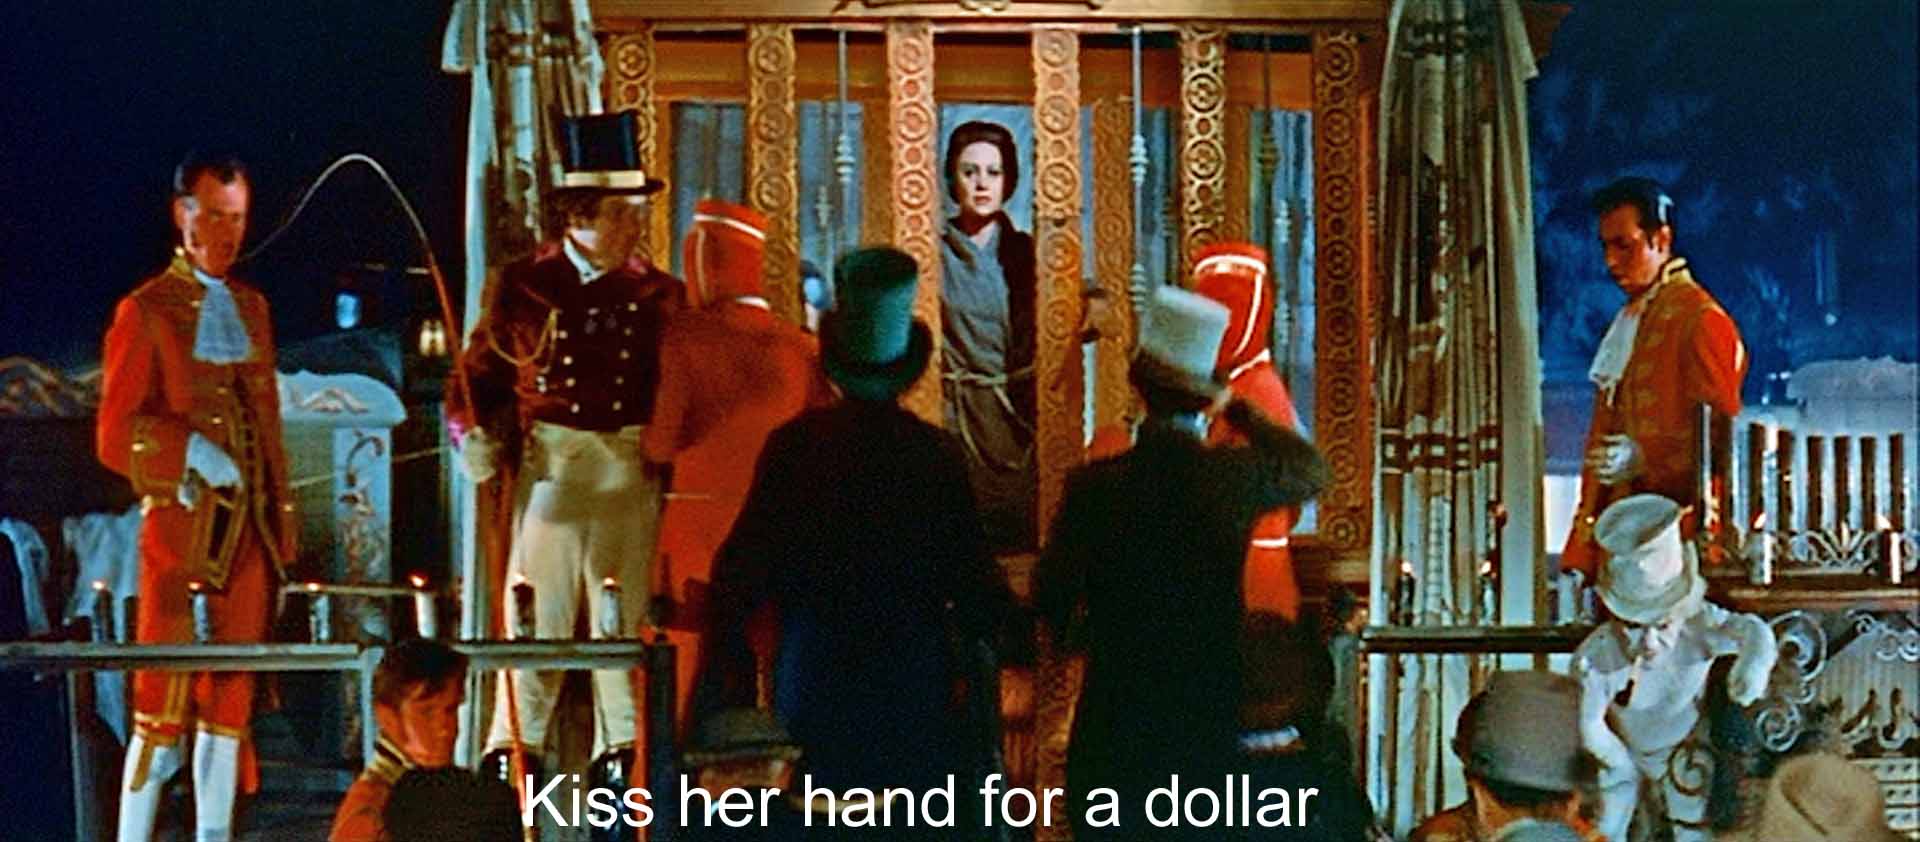 Kiss her hand for a dollar